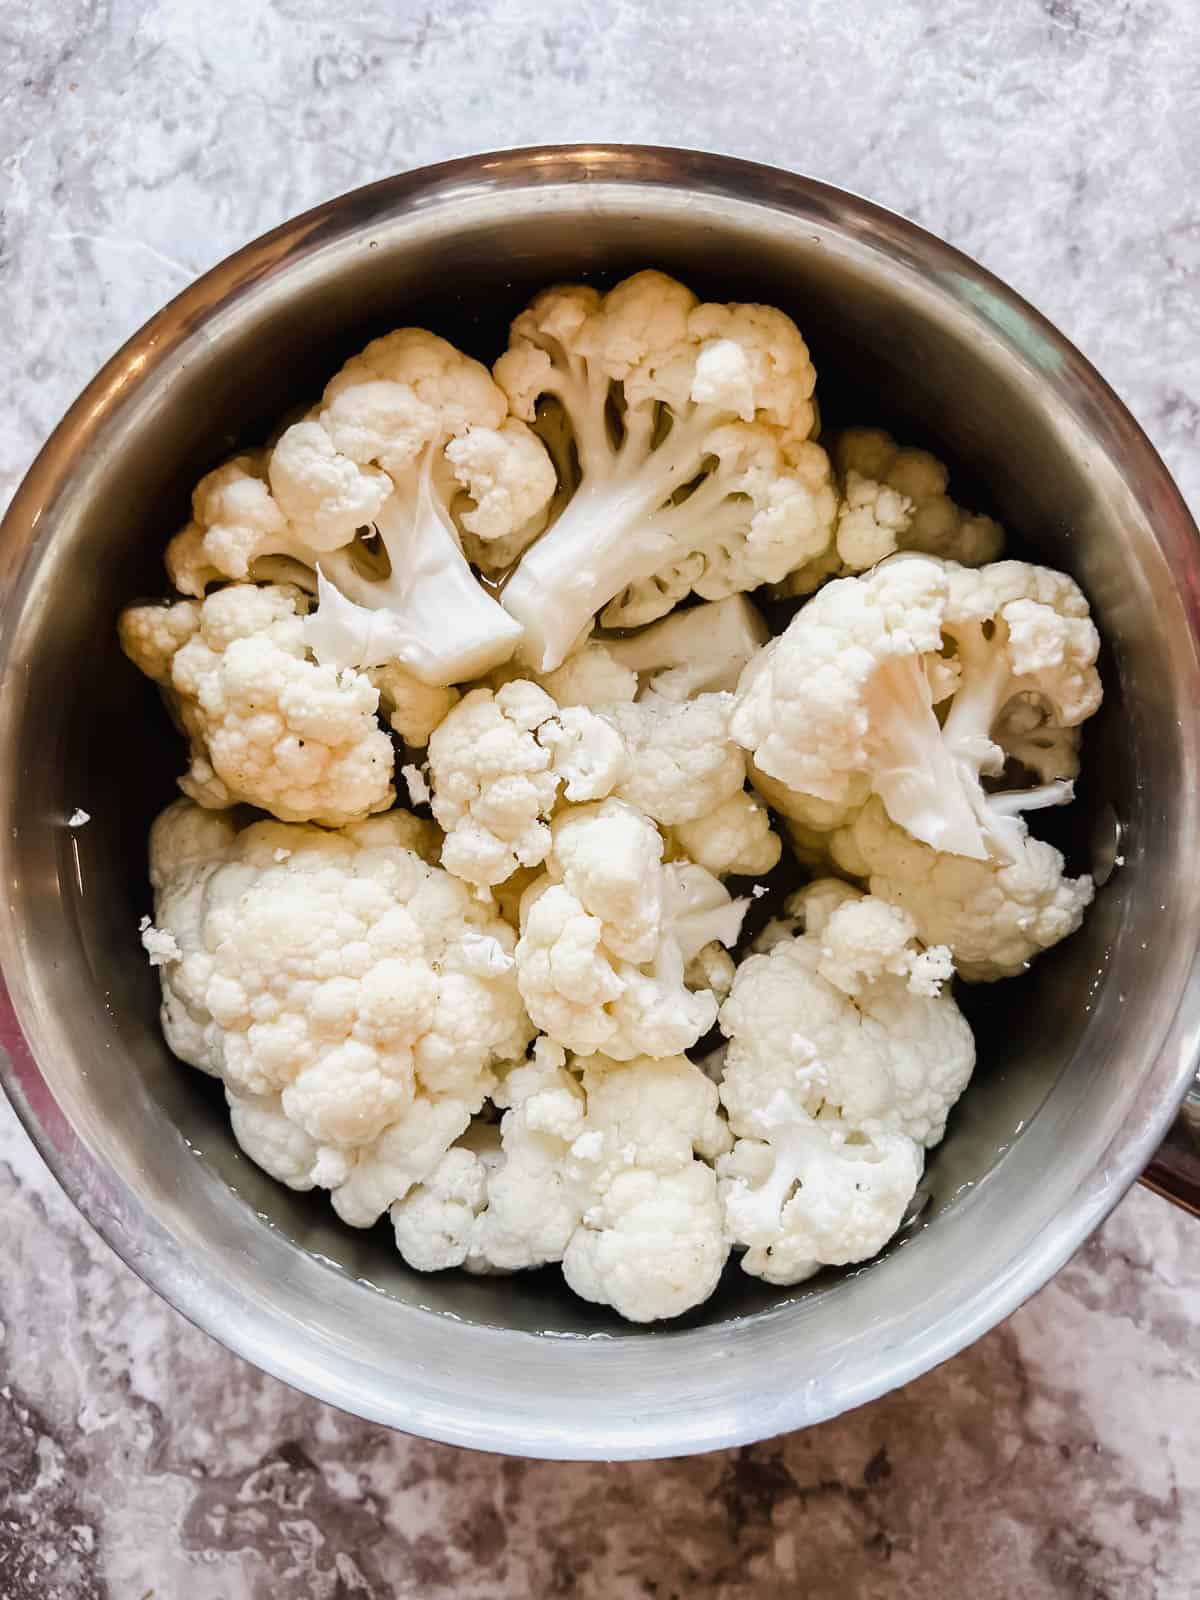 Cauliflower in a pot, ready to be boiled.